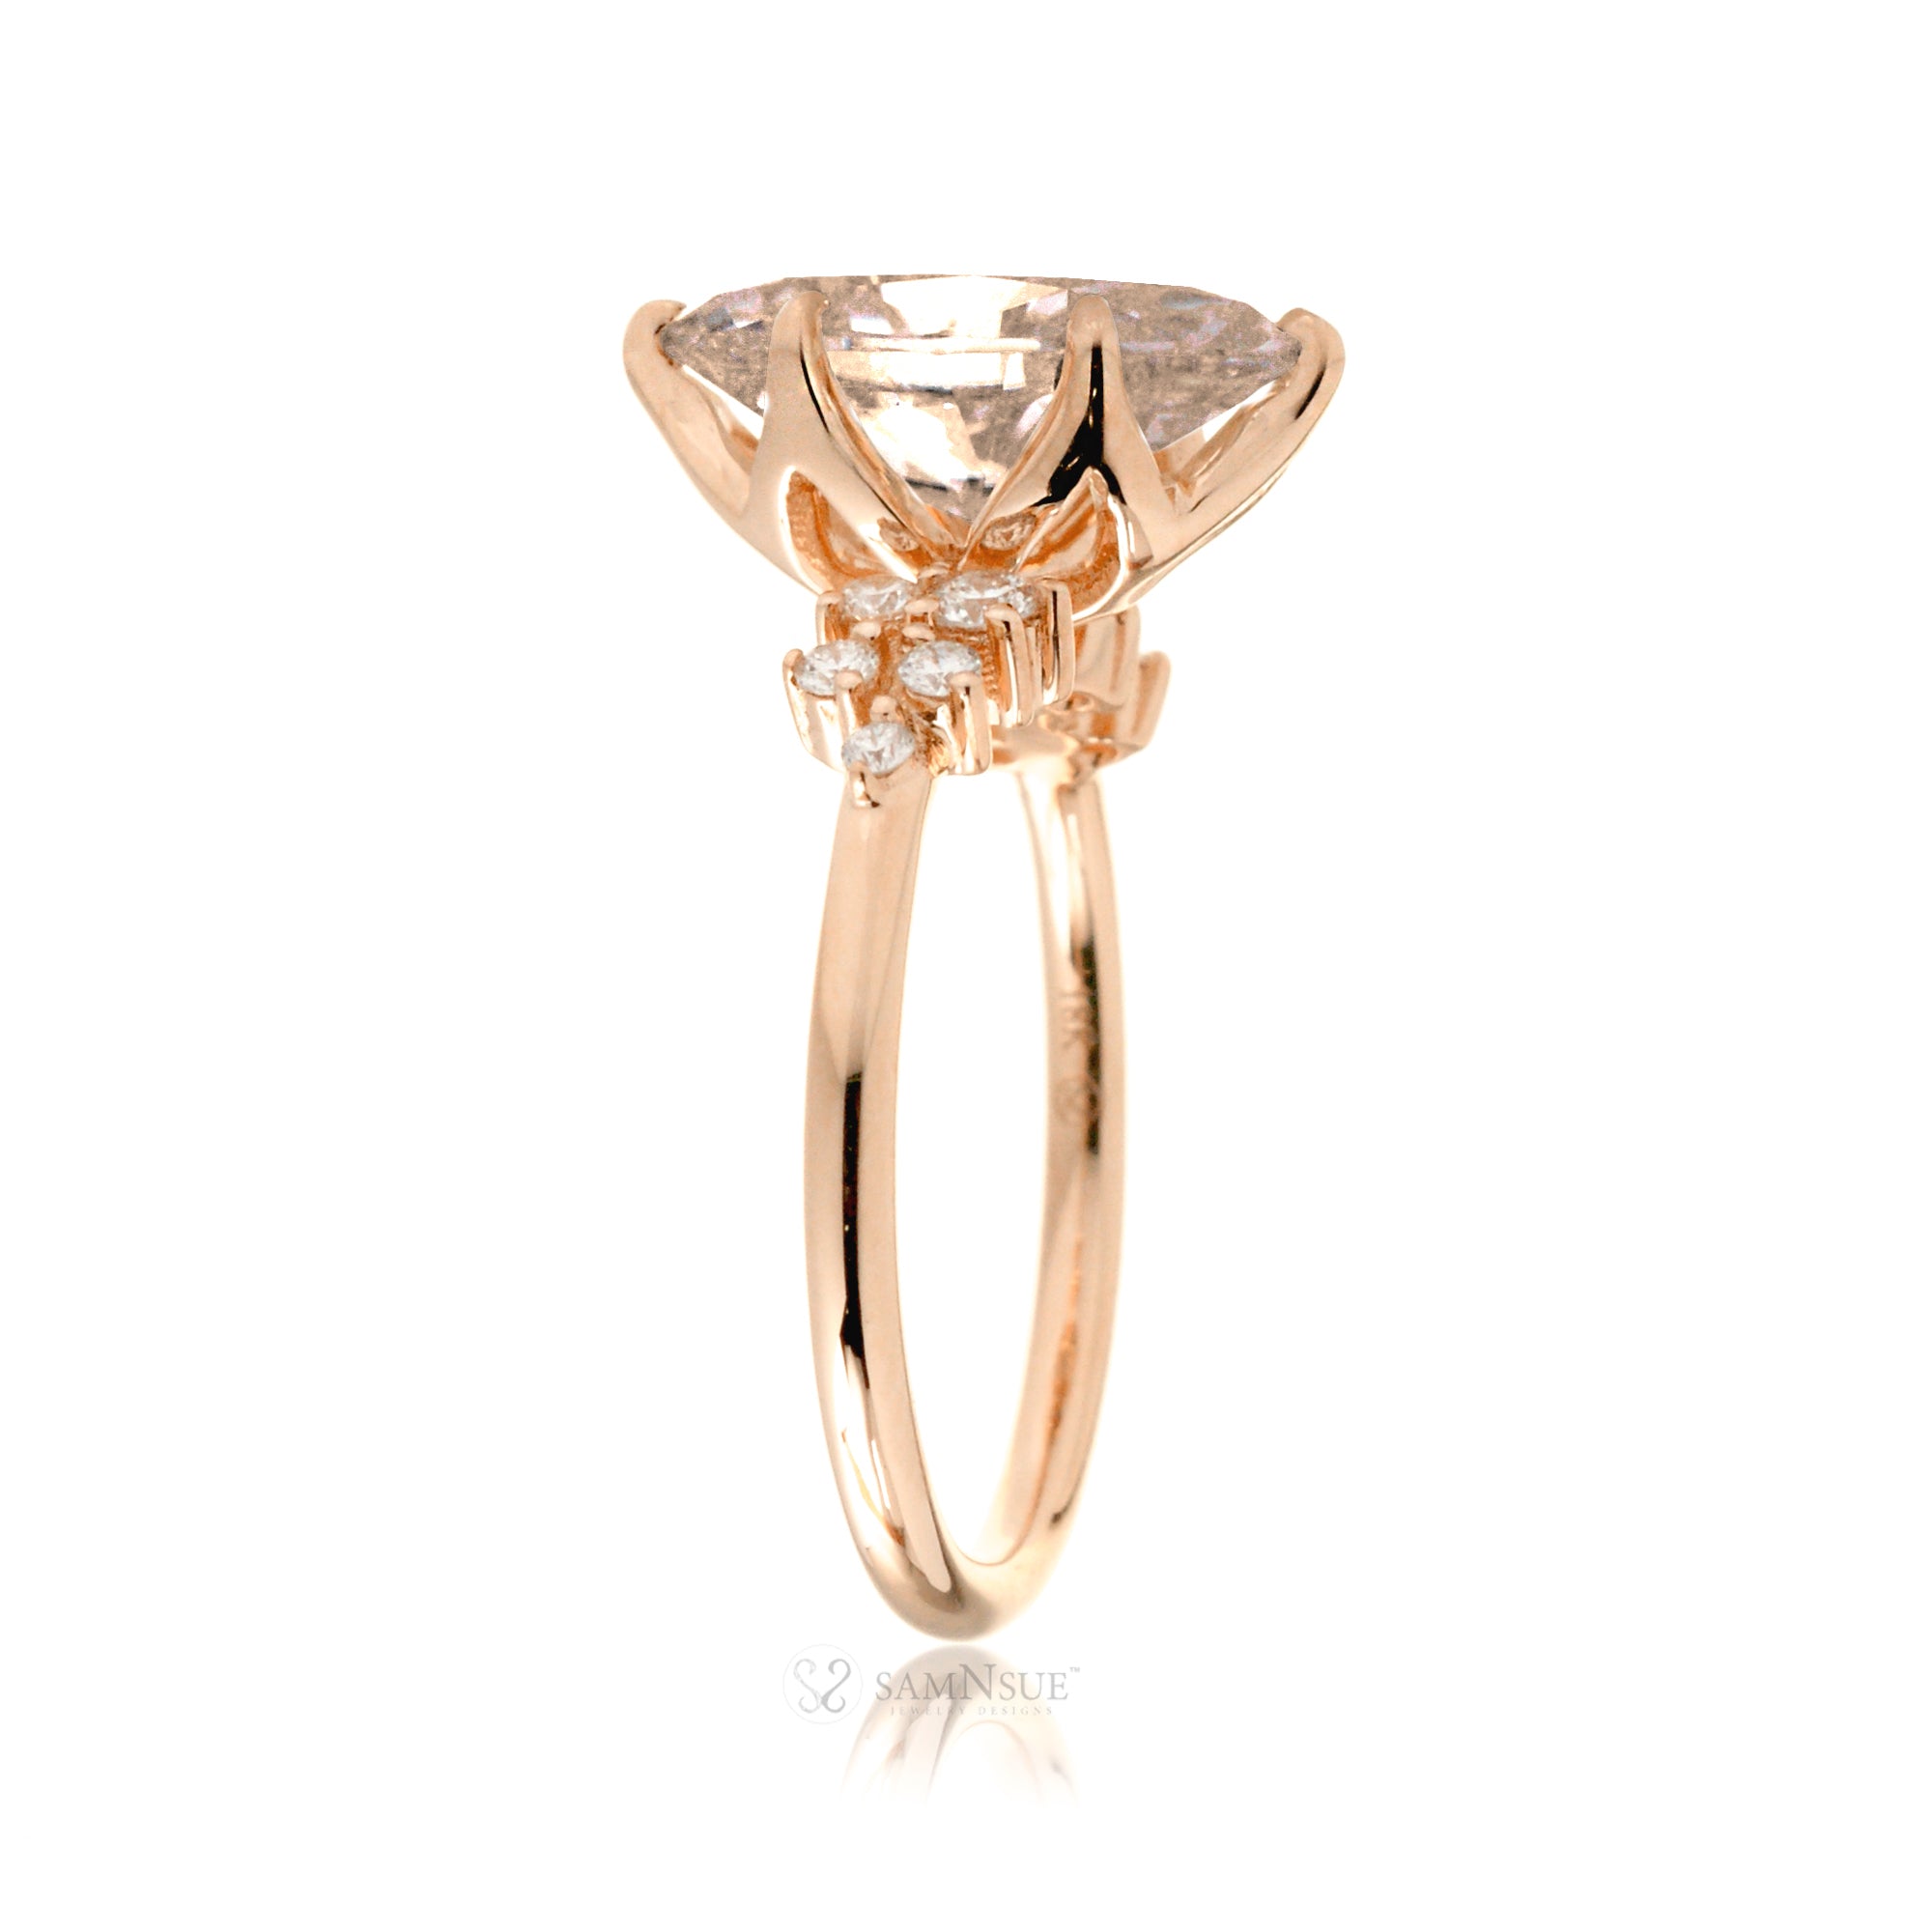 Oval cut morganite ring with diamond accent in rose gold